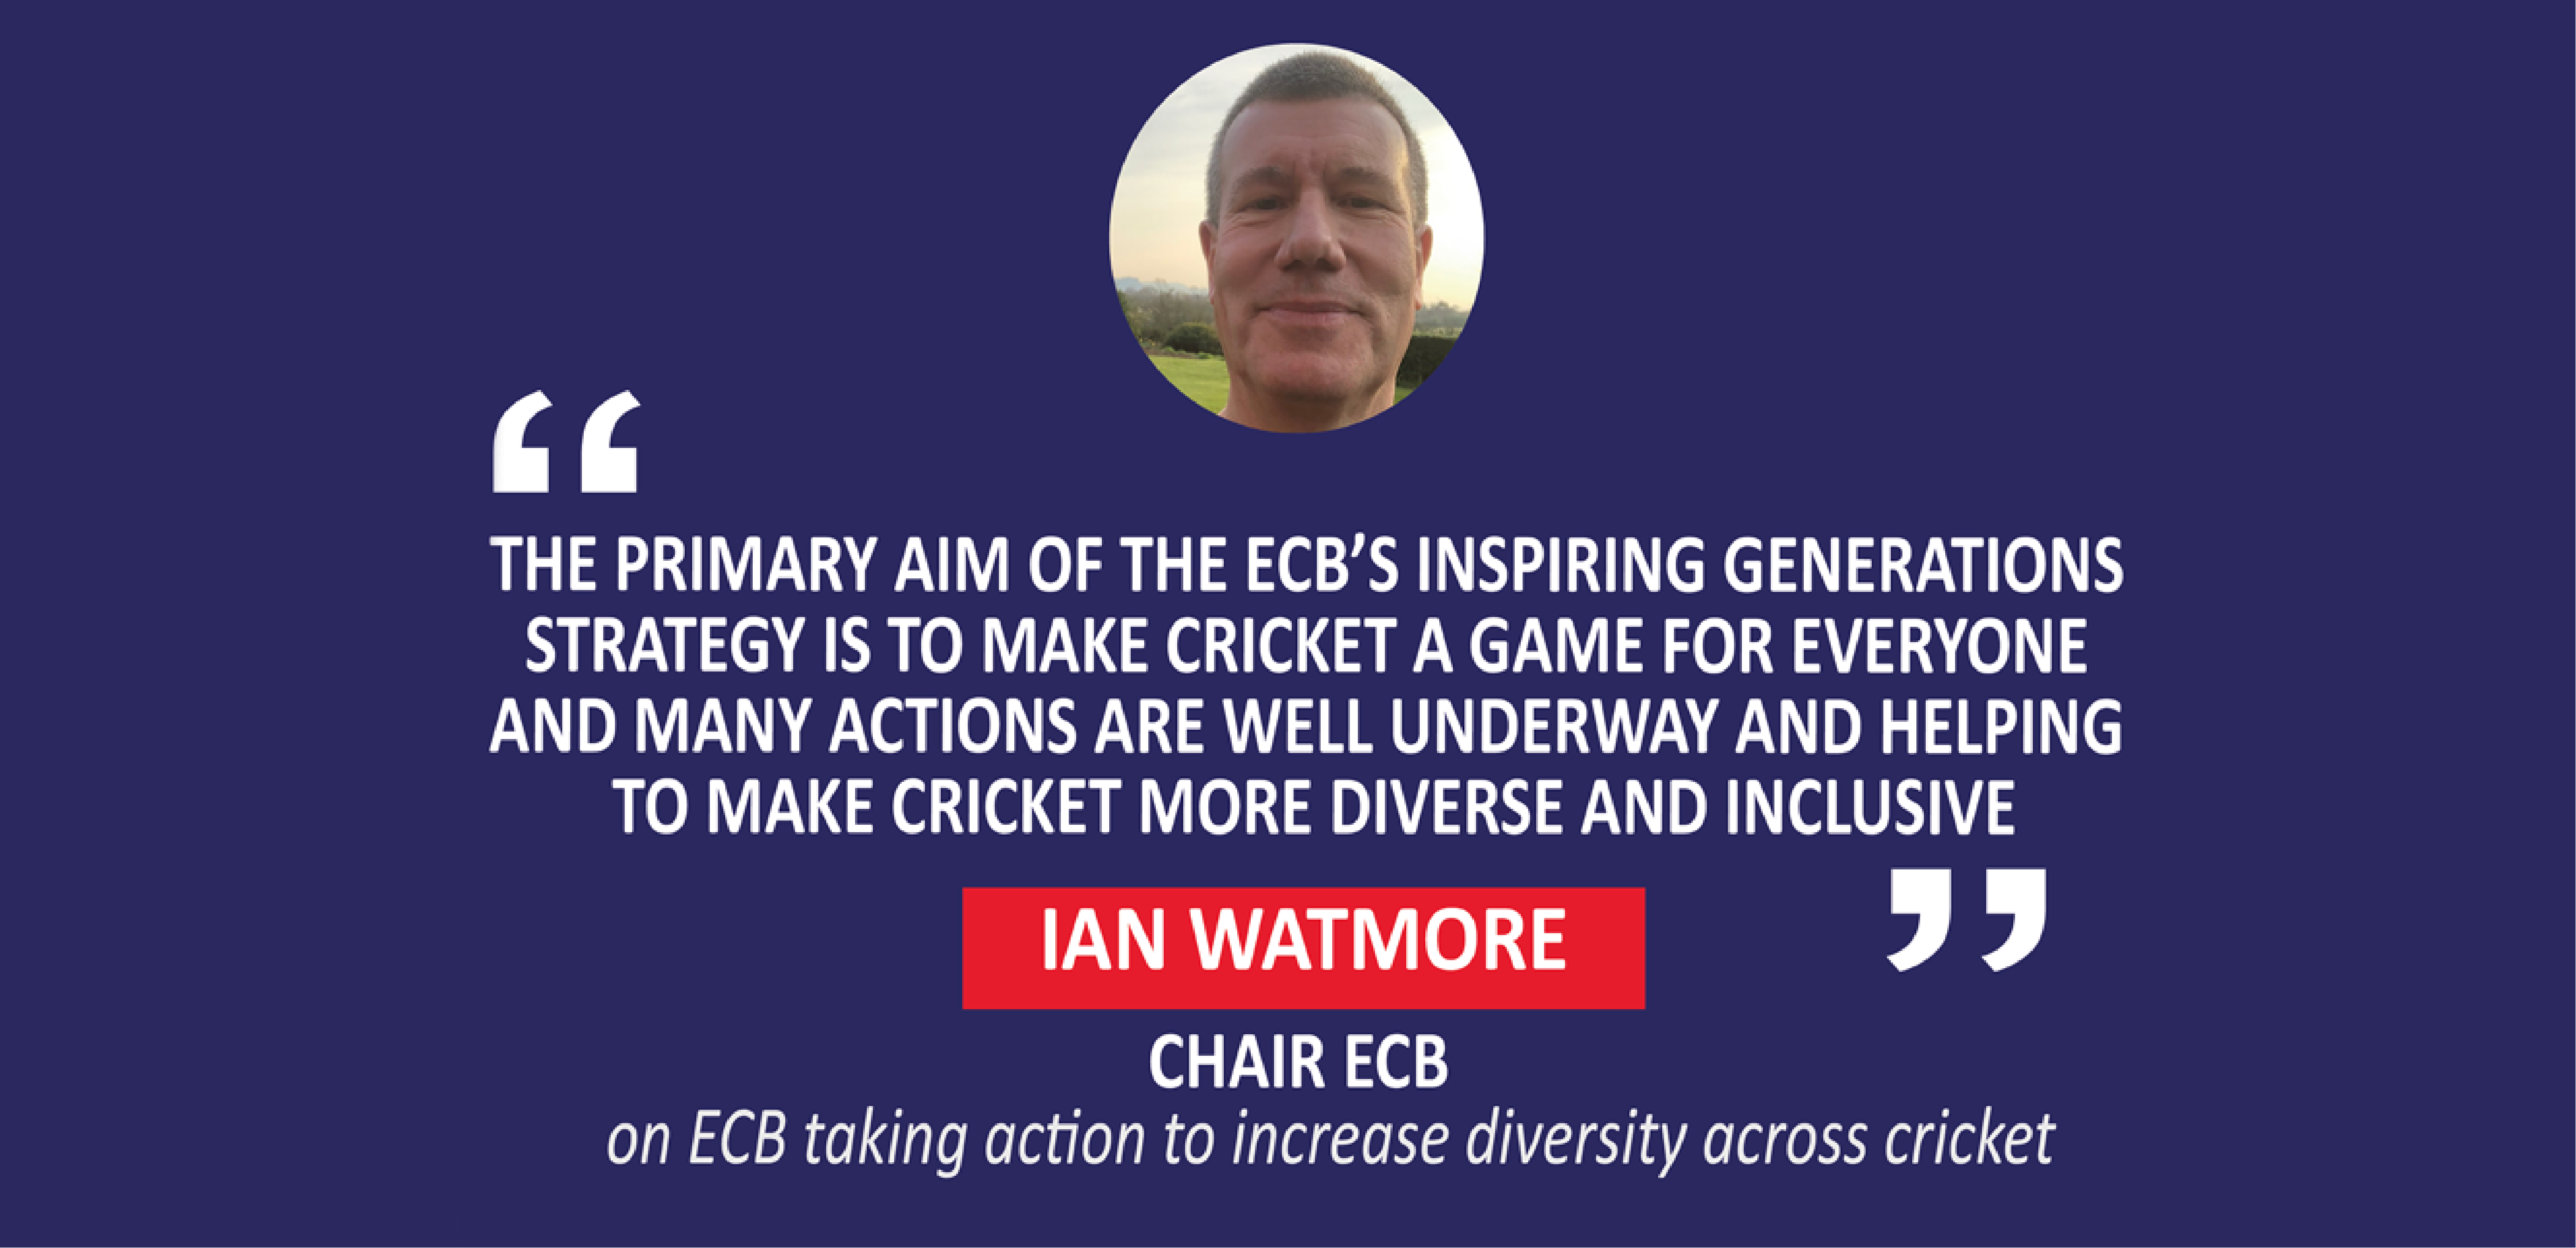 Ian Watmore, Chair ECB on ECB taking action to increase diversity across cricket